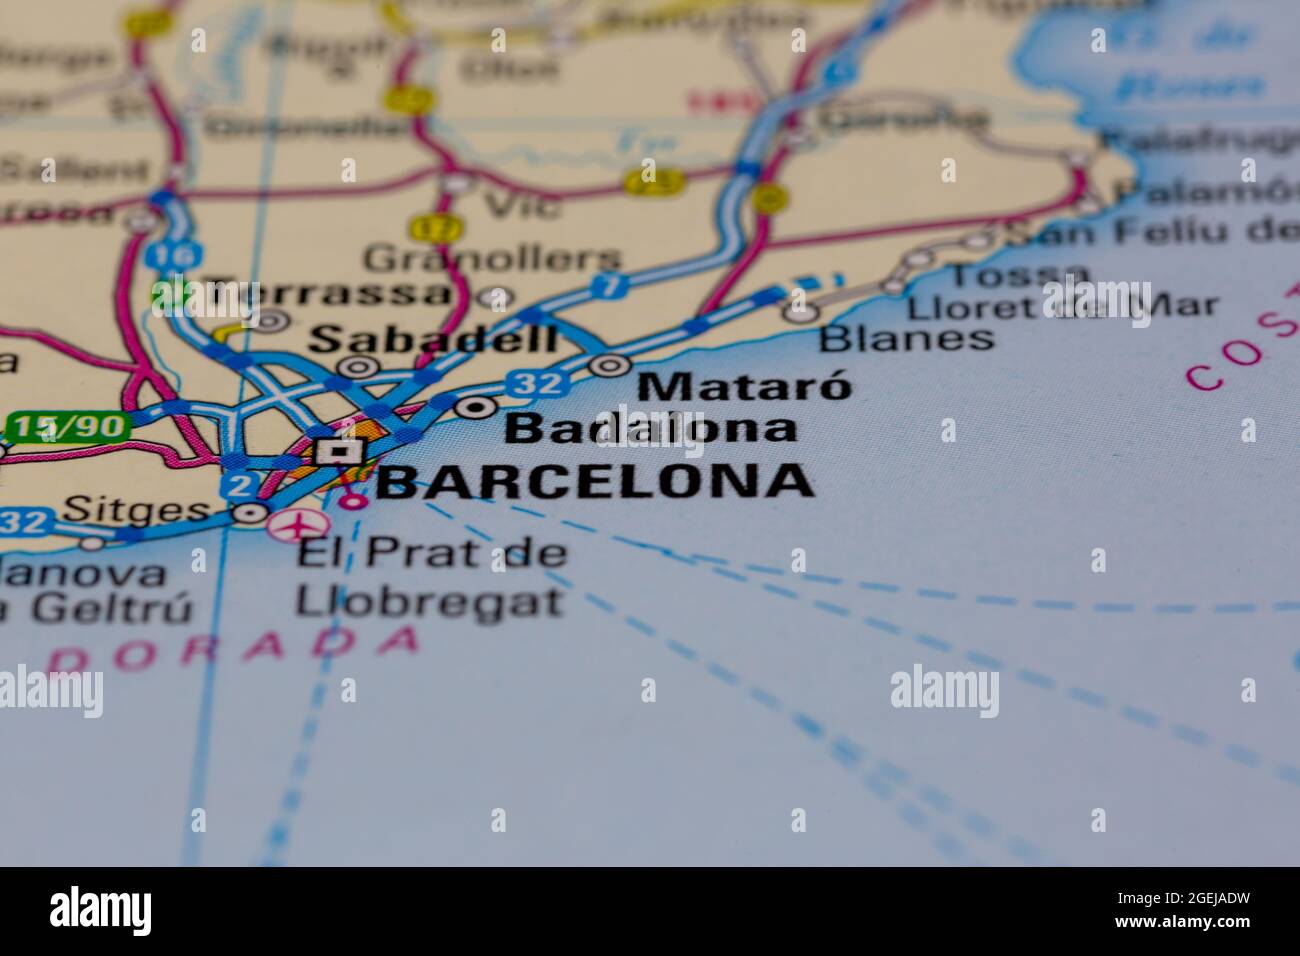 Badalona Spain shown on a road map or Geography map Stock Photo